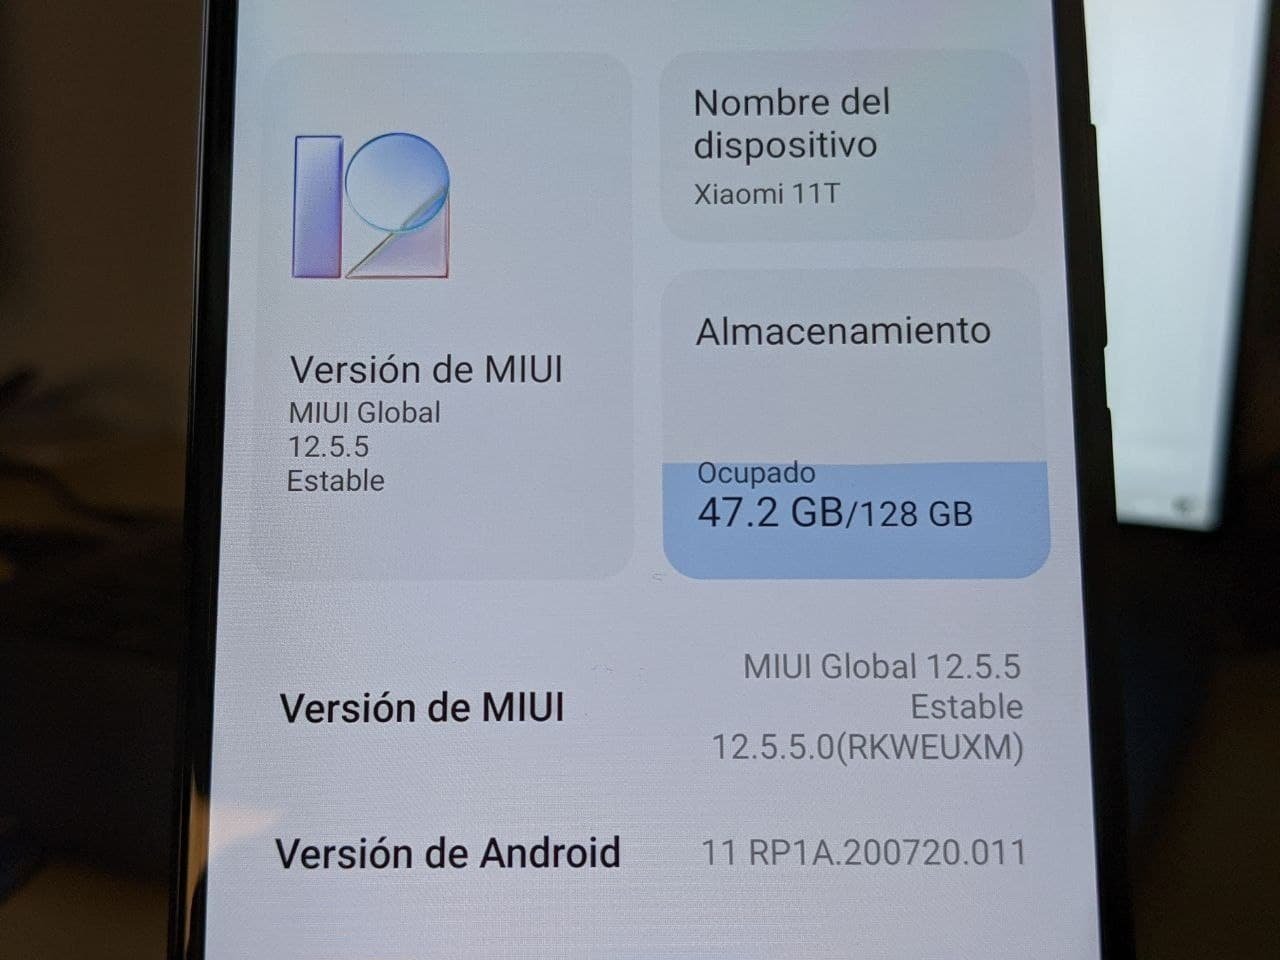 MIUI version numbers and letters